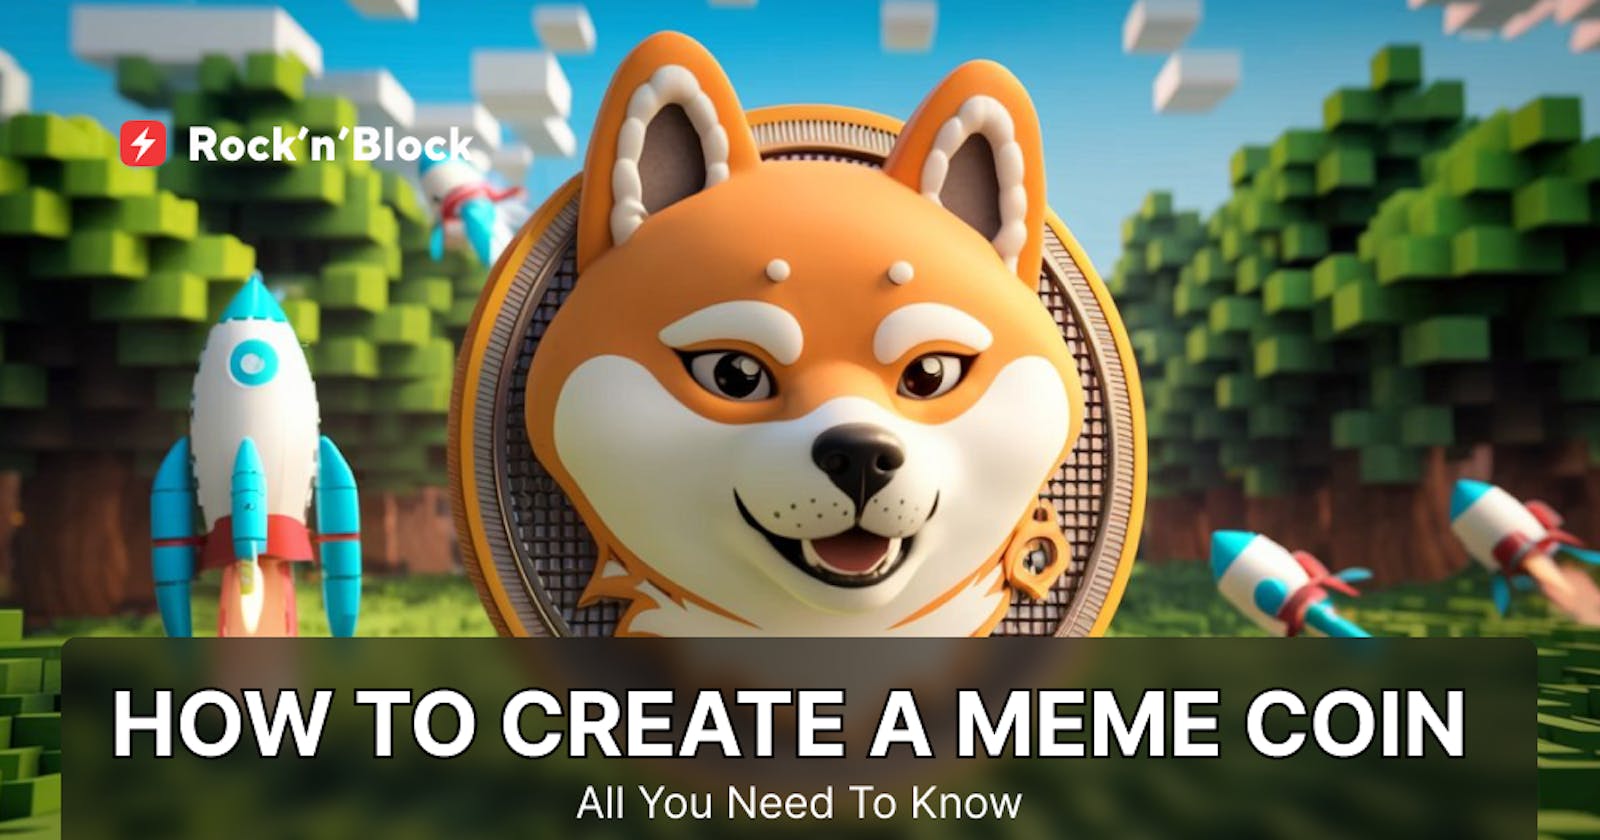 Step-by-Step Guide on How to Create a Meme Coin